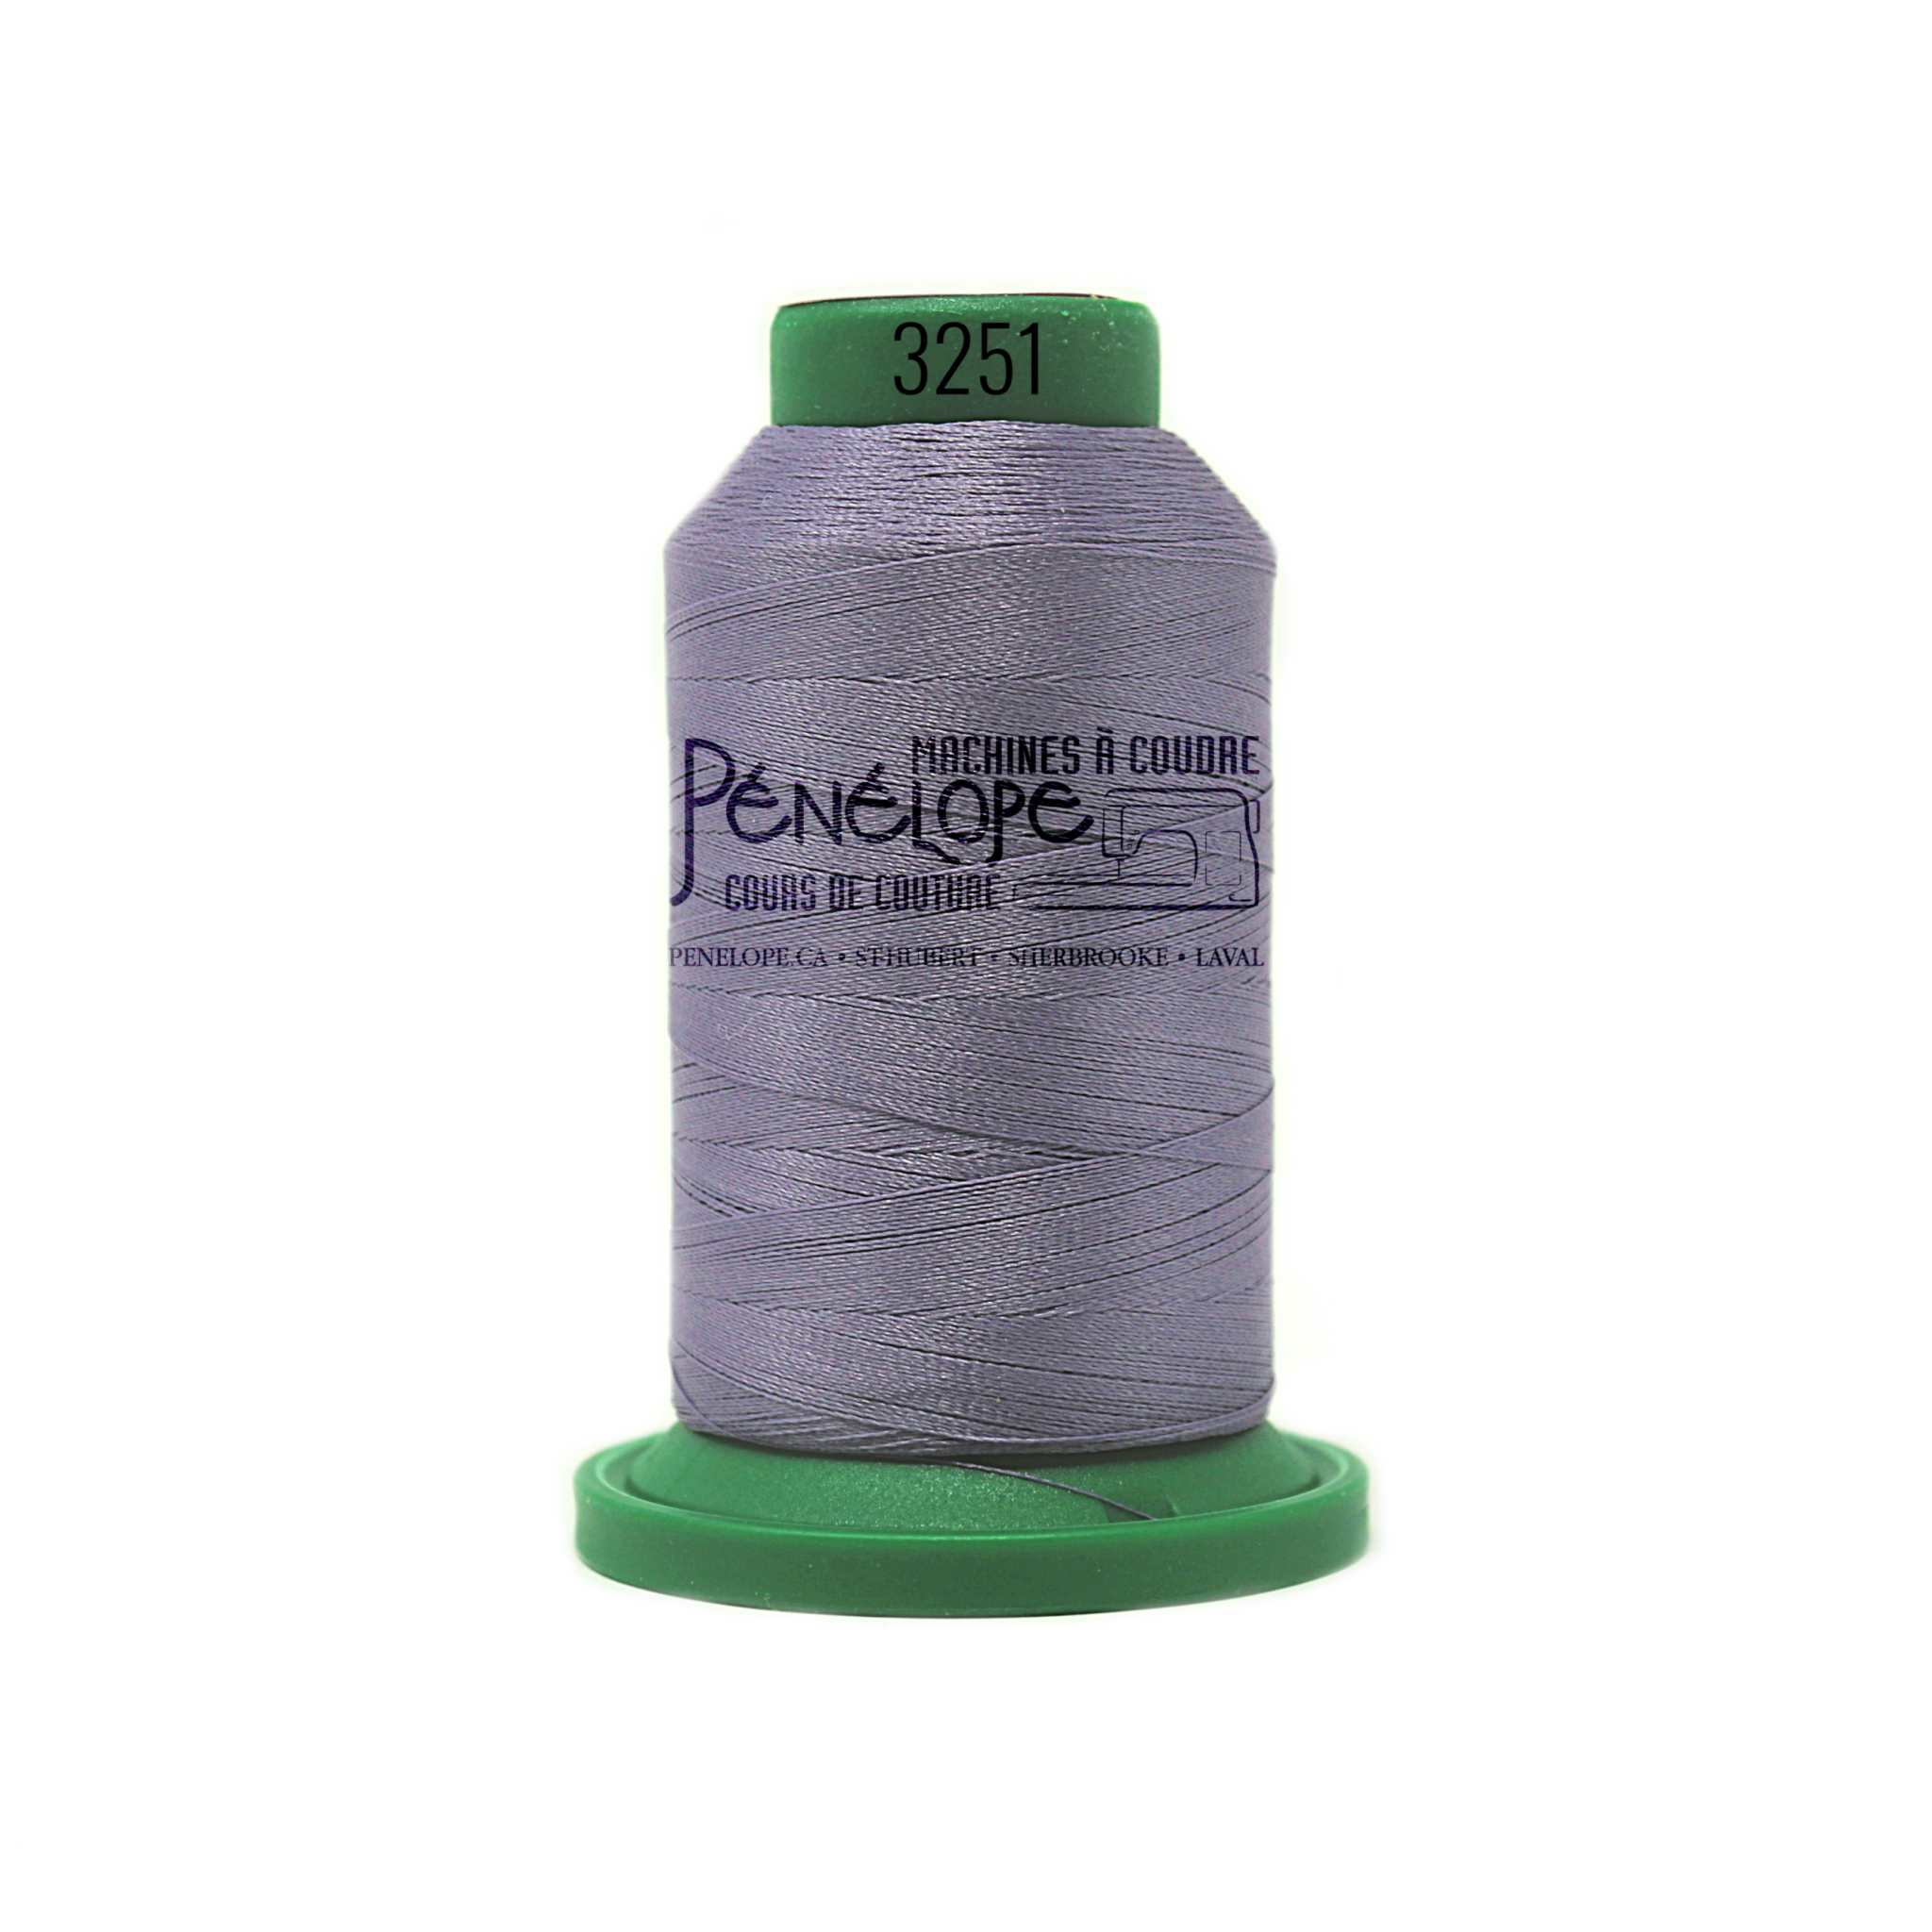 Isacord Isacord sewing and embroidery thread 3251